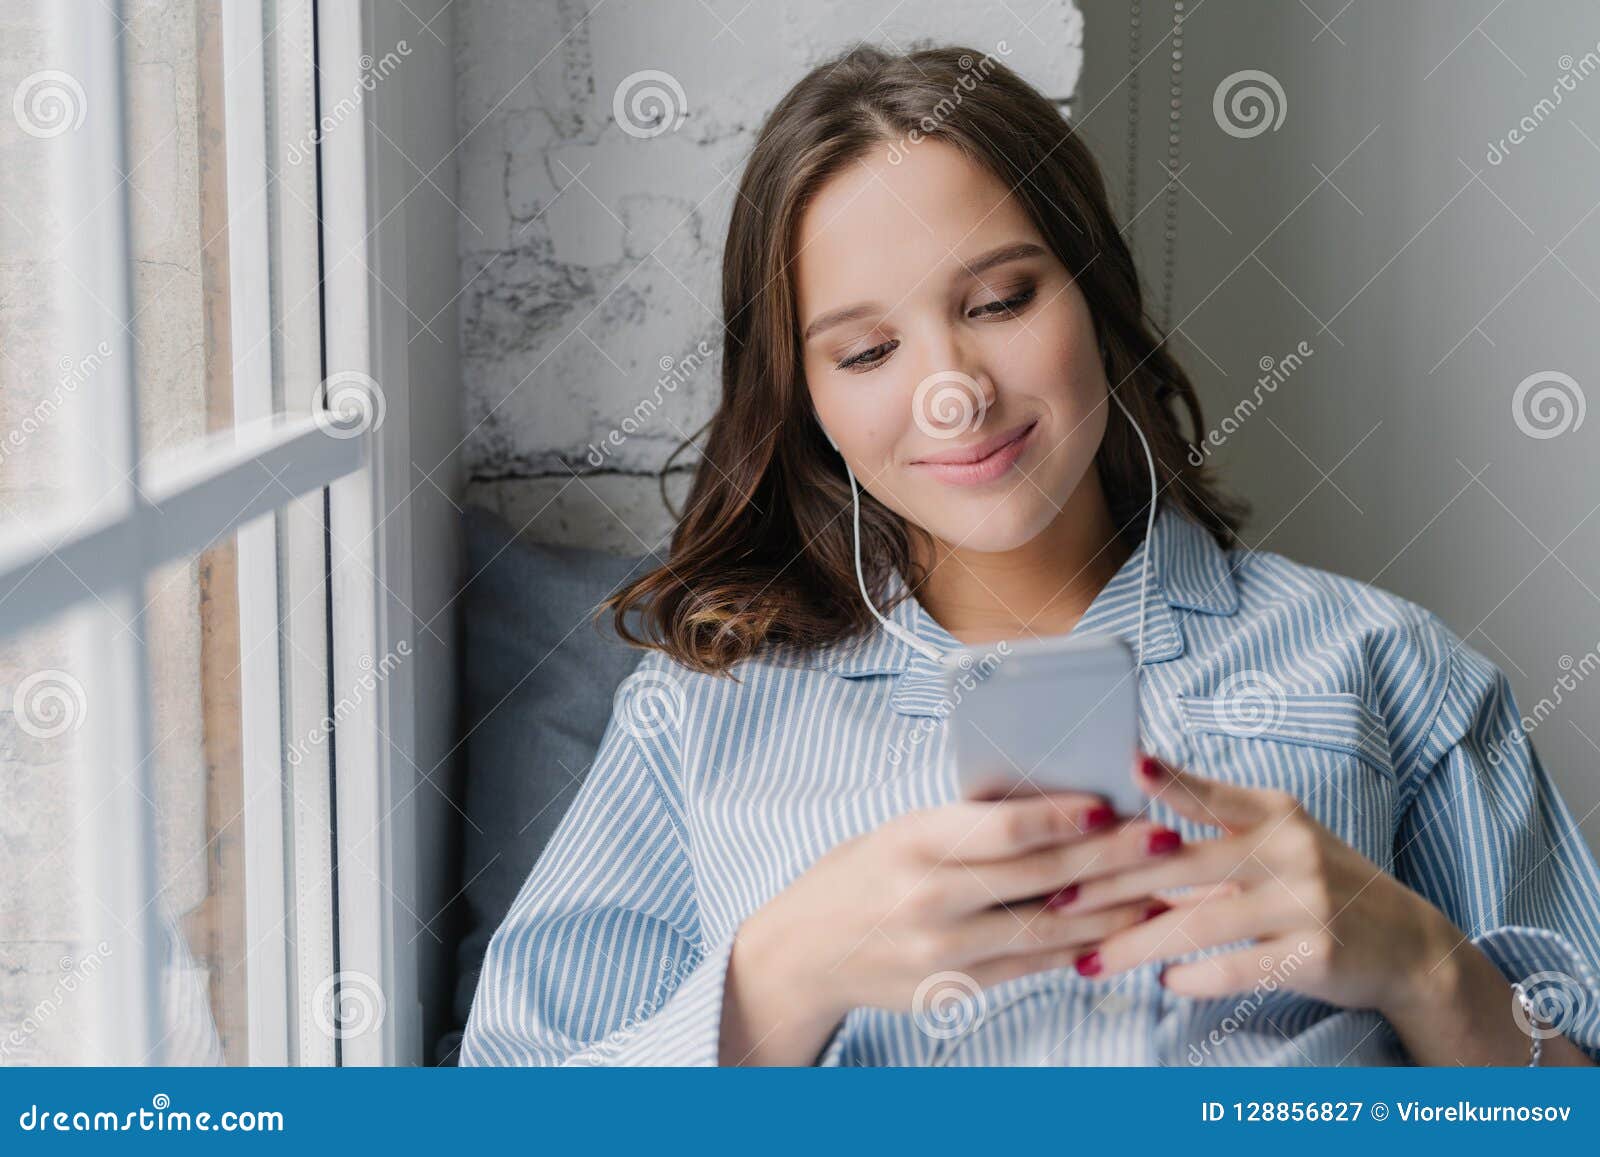 photo of cauasian woman selects favourite song in playlist, uses contemporary cellular and high quality earphones, dressed in casu